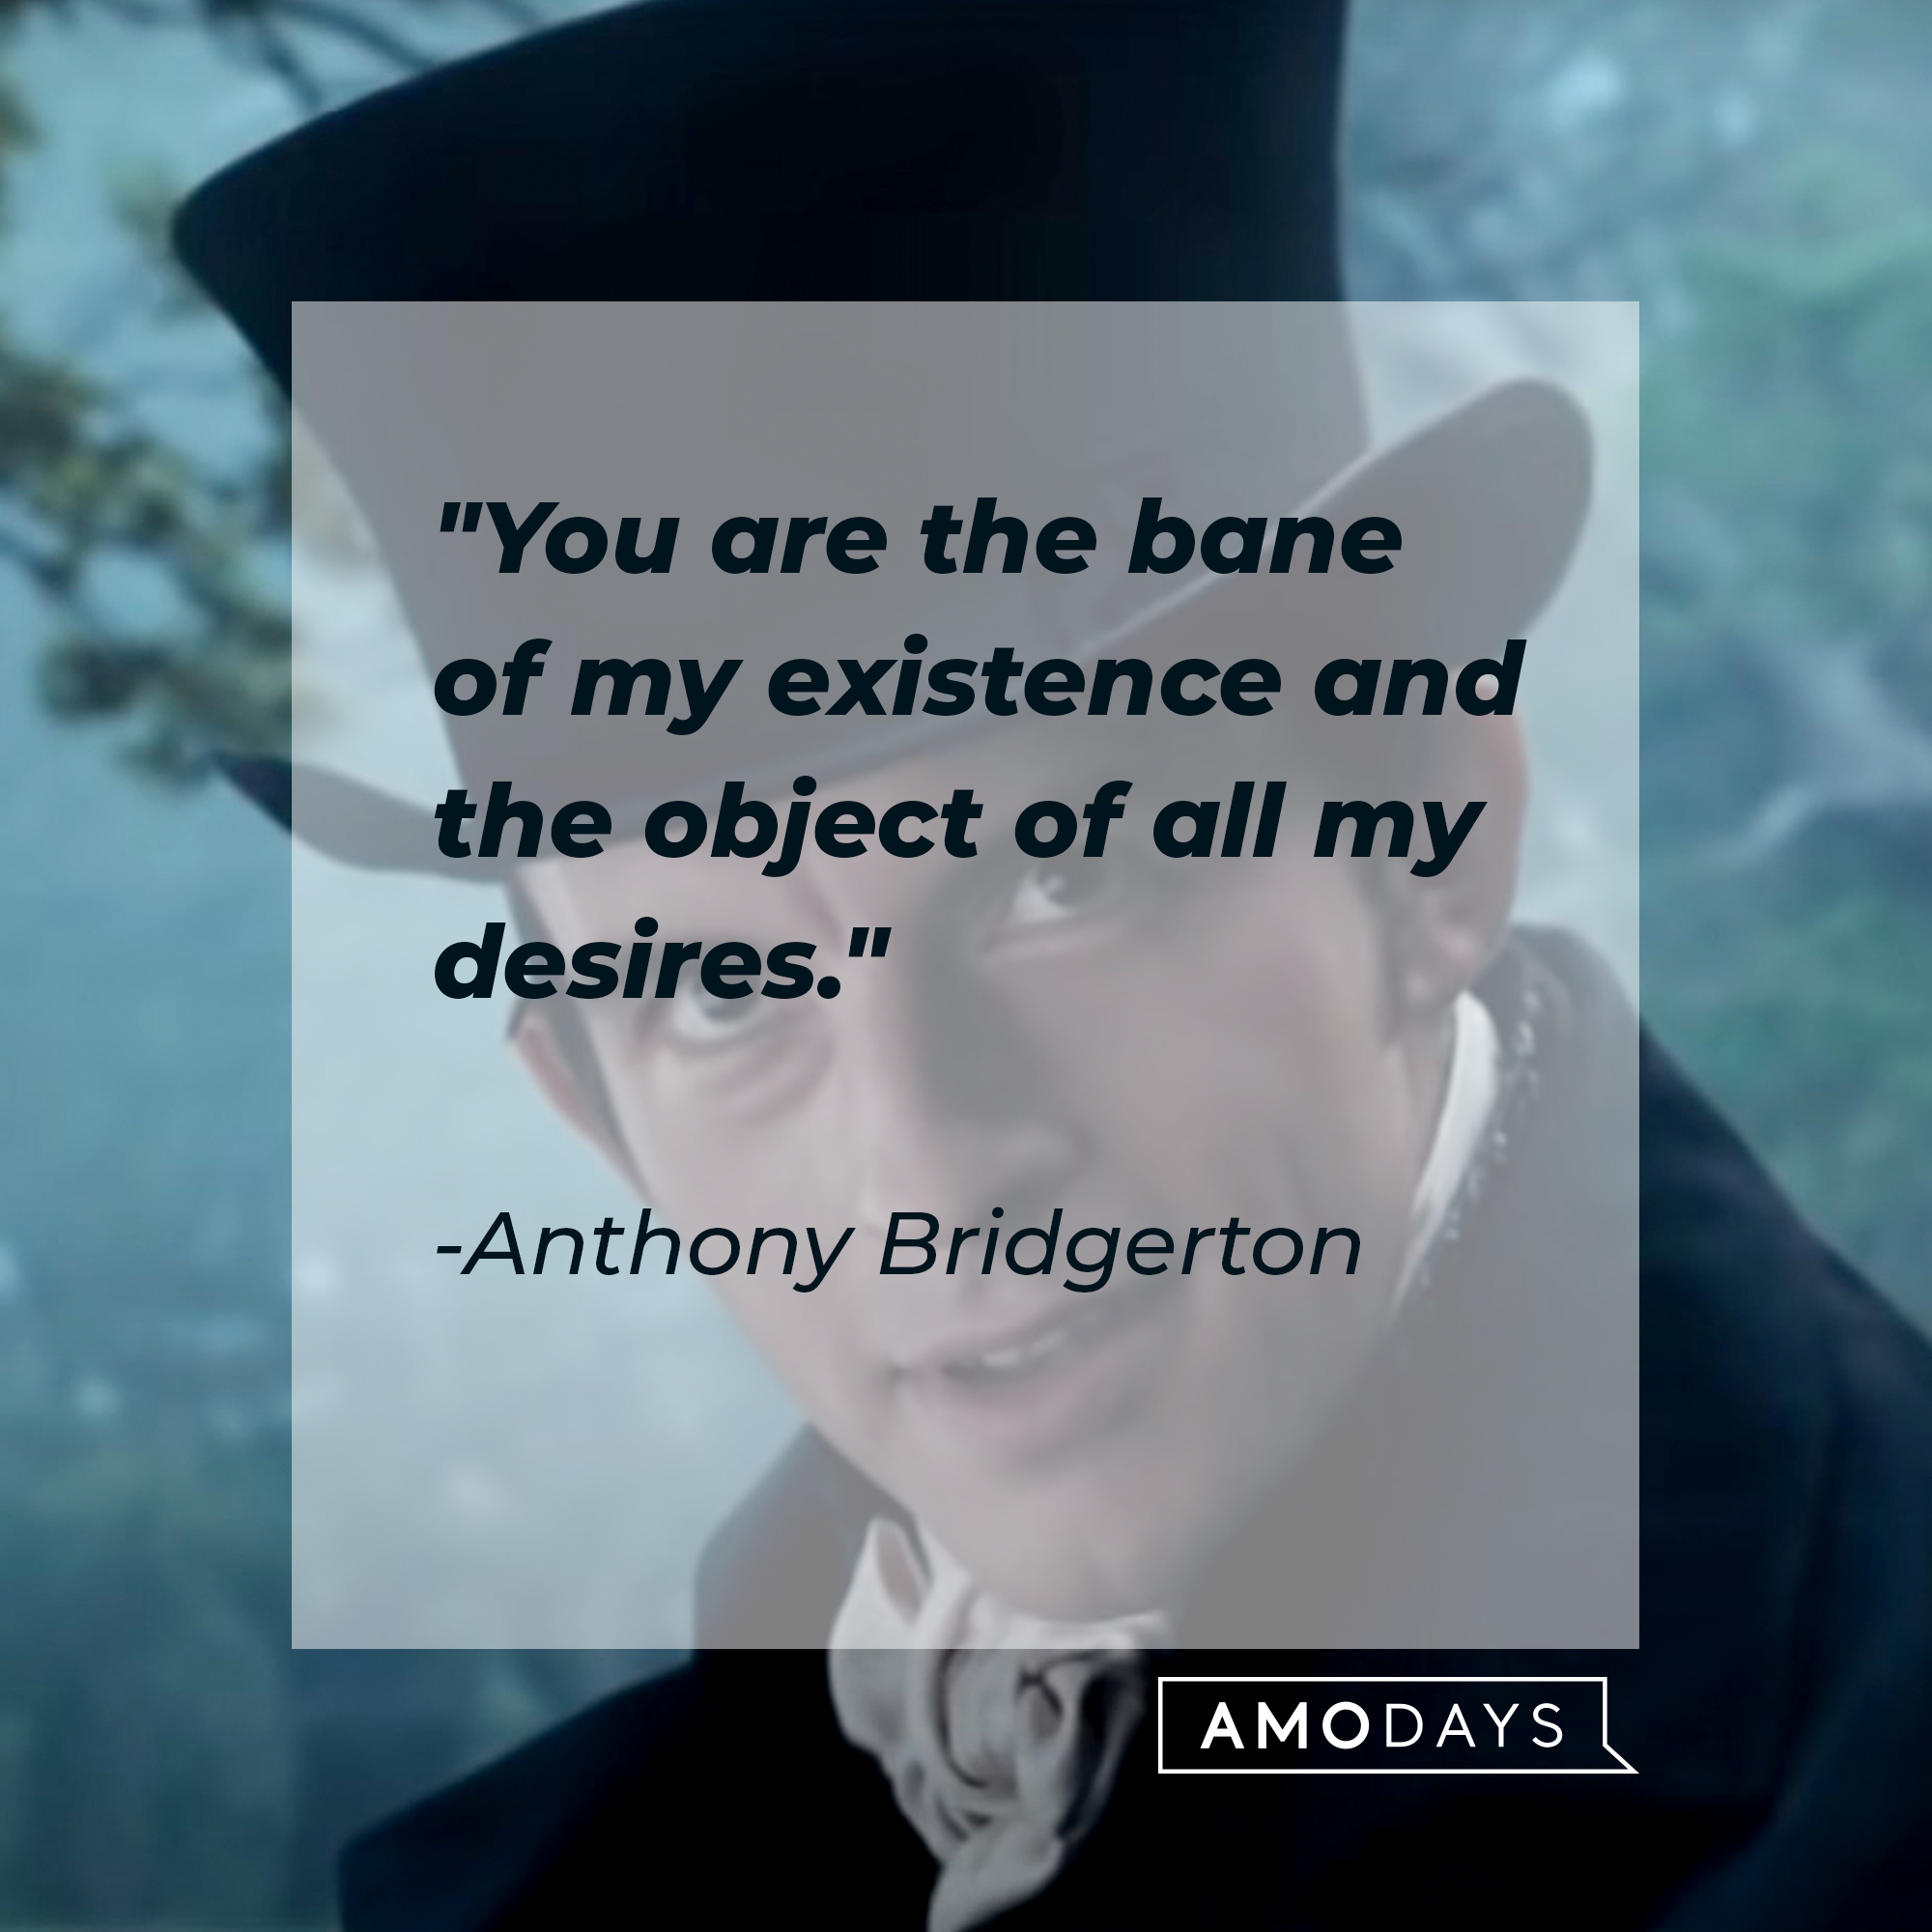 An image of Anthony Bridgerton with his quote: “You are the bane of my existence, and the object of all my desires.“ │ youtube.com/Netflix